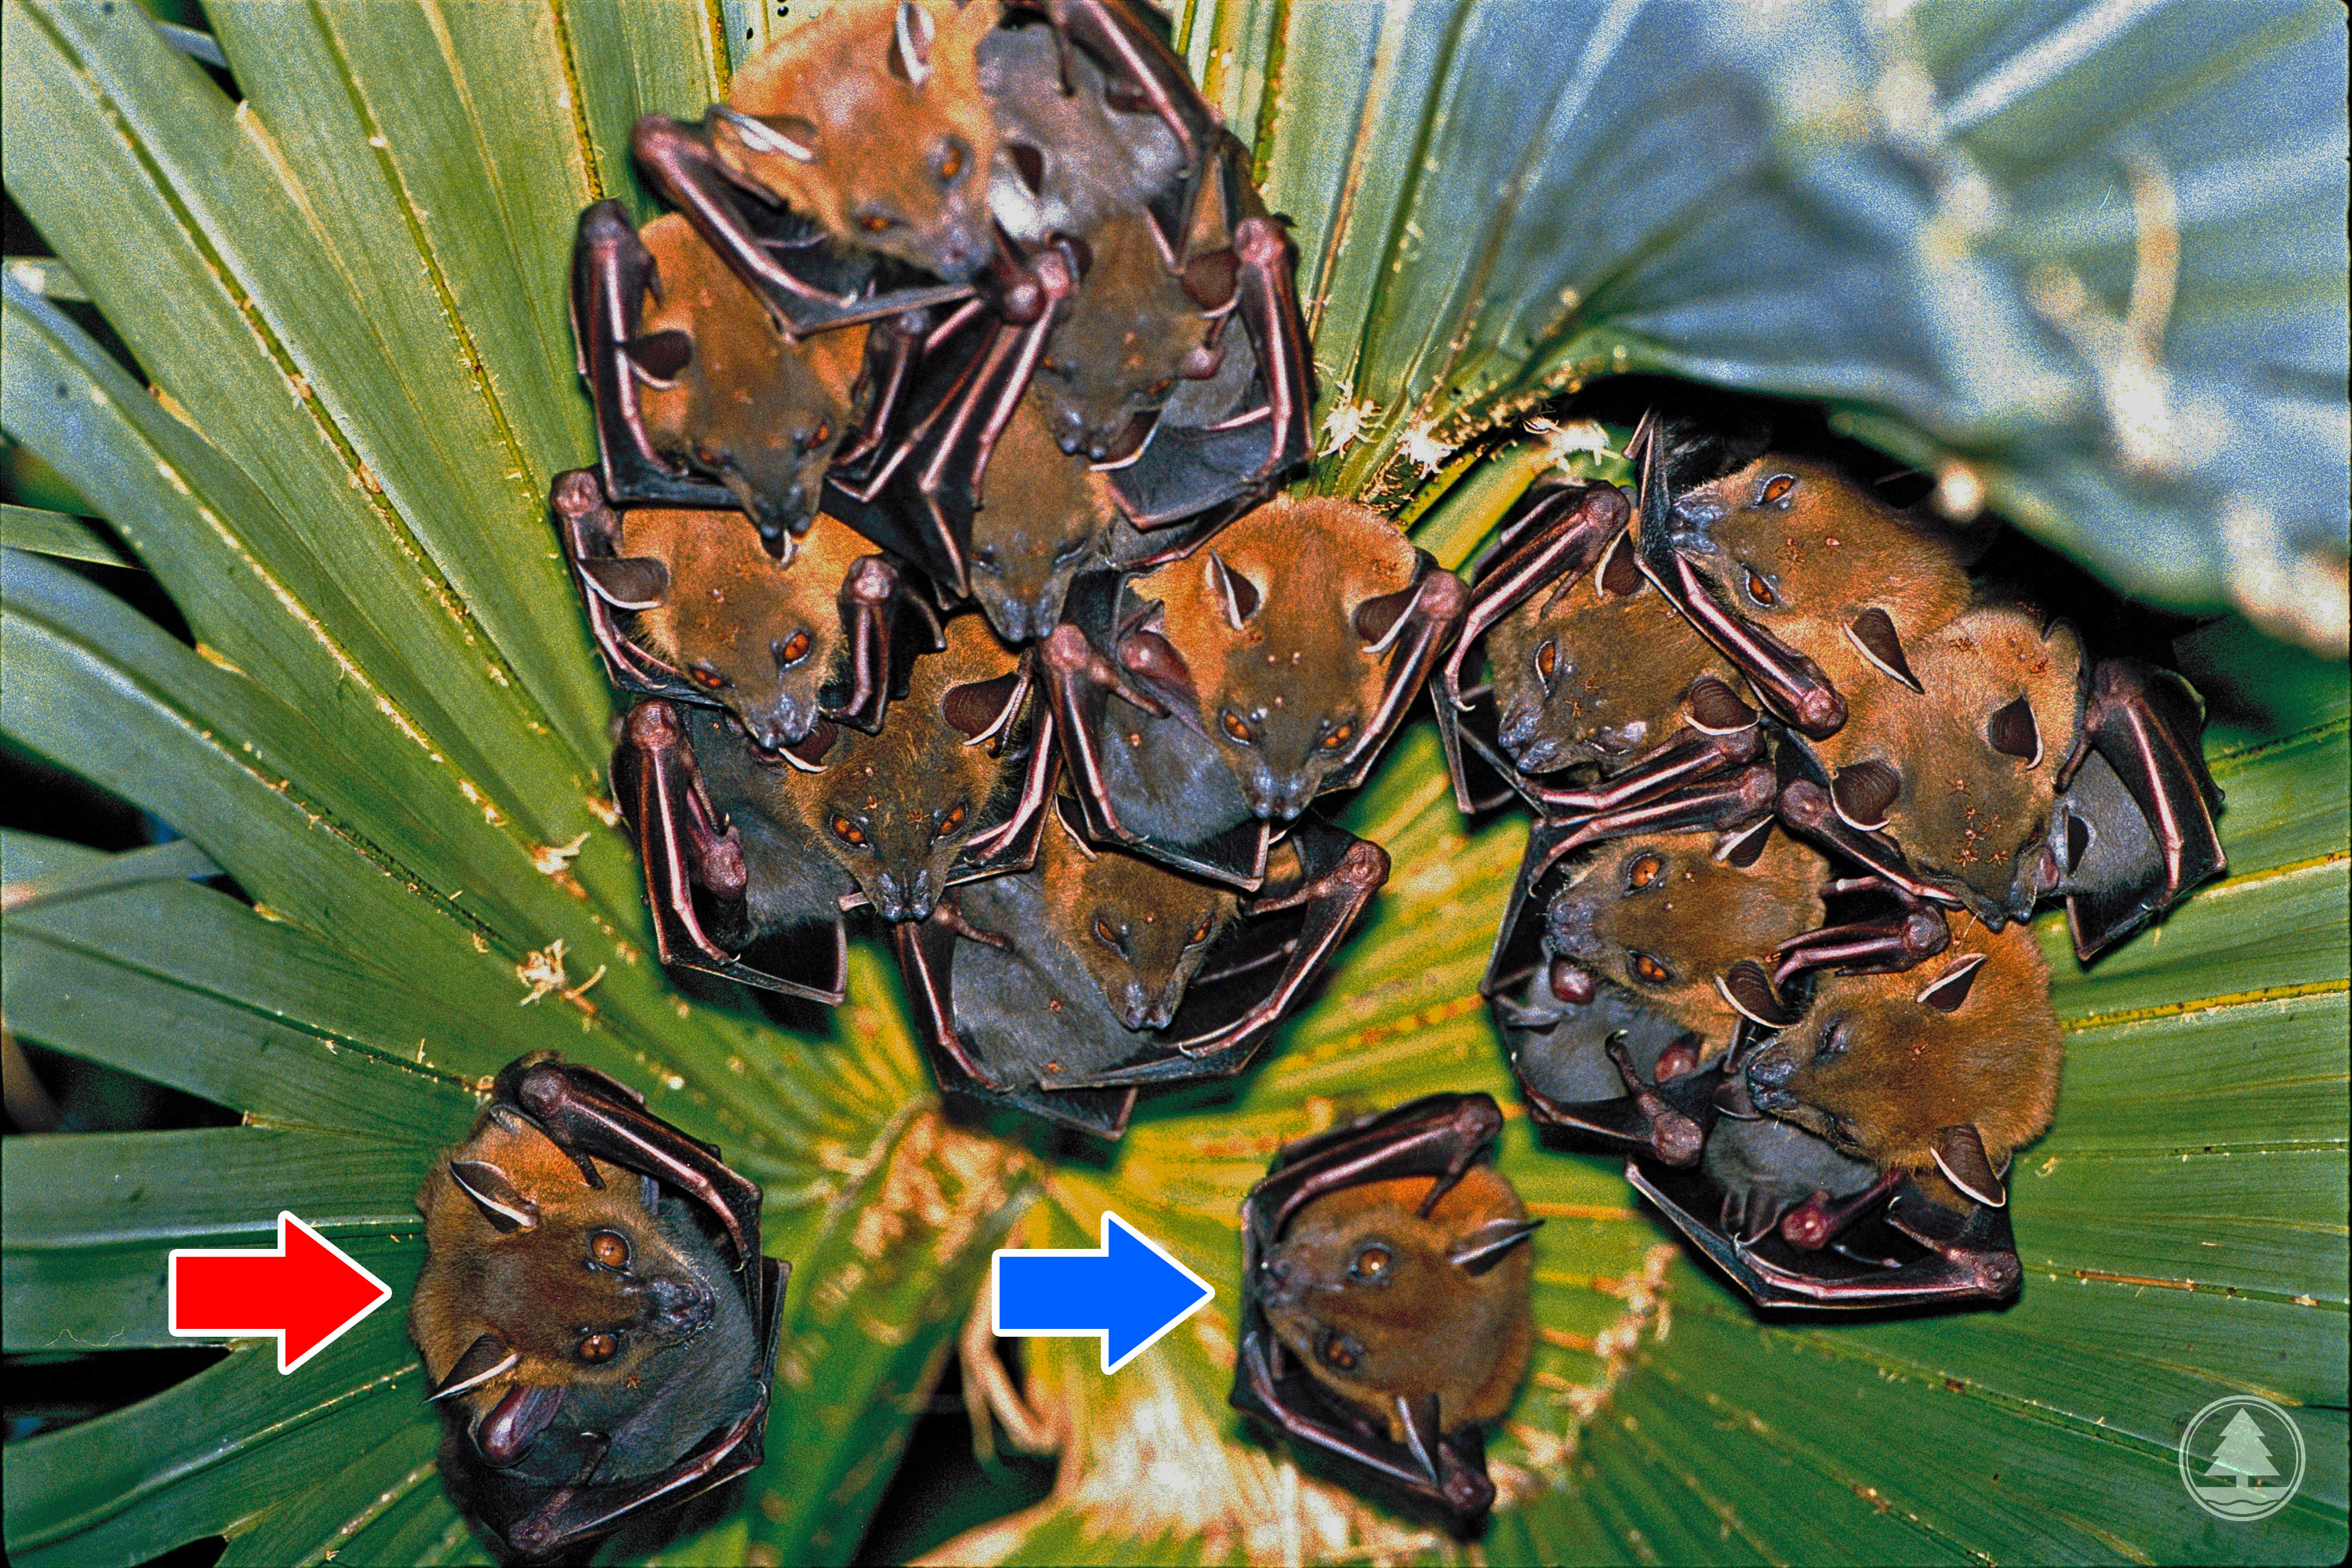 A harem of a dominant male (blue arrow) associated with reproductive females (red arrow) and their dependent young